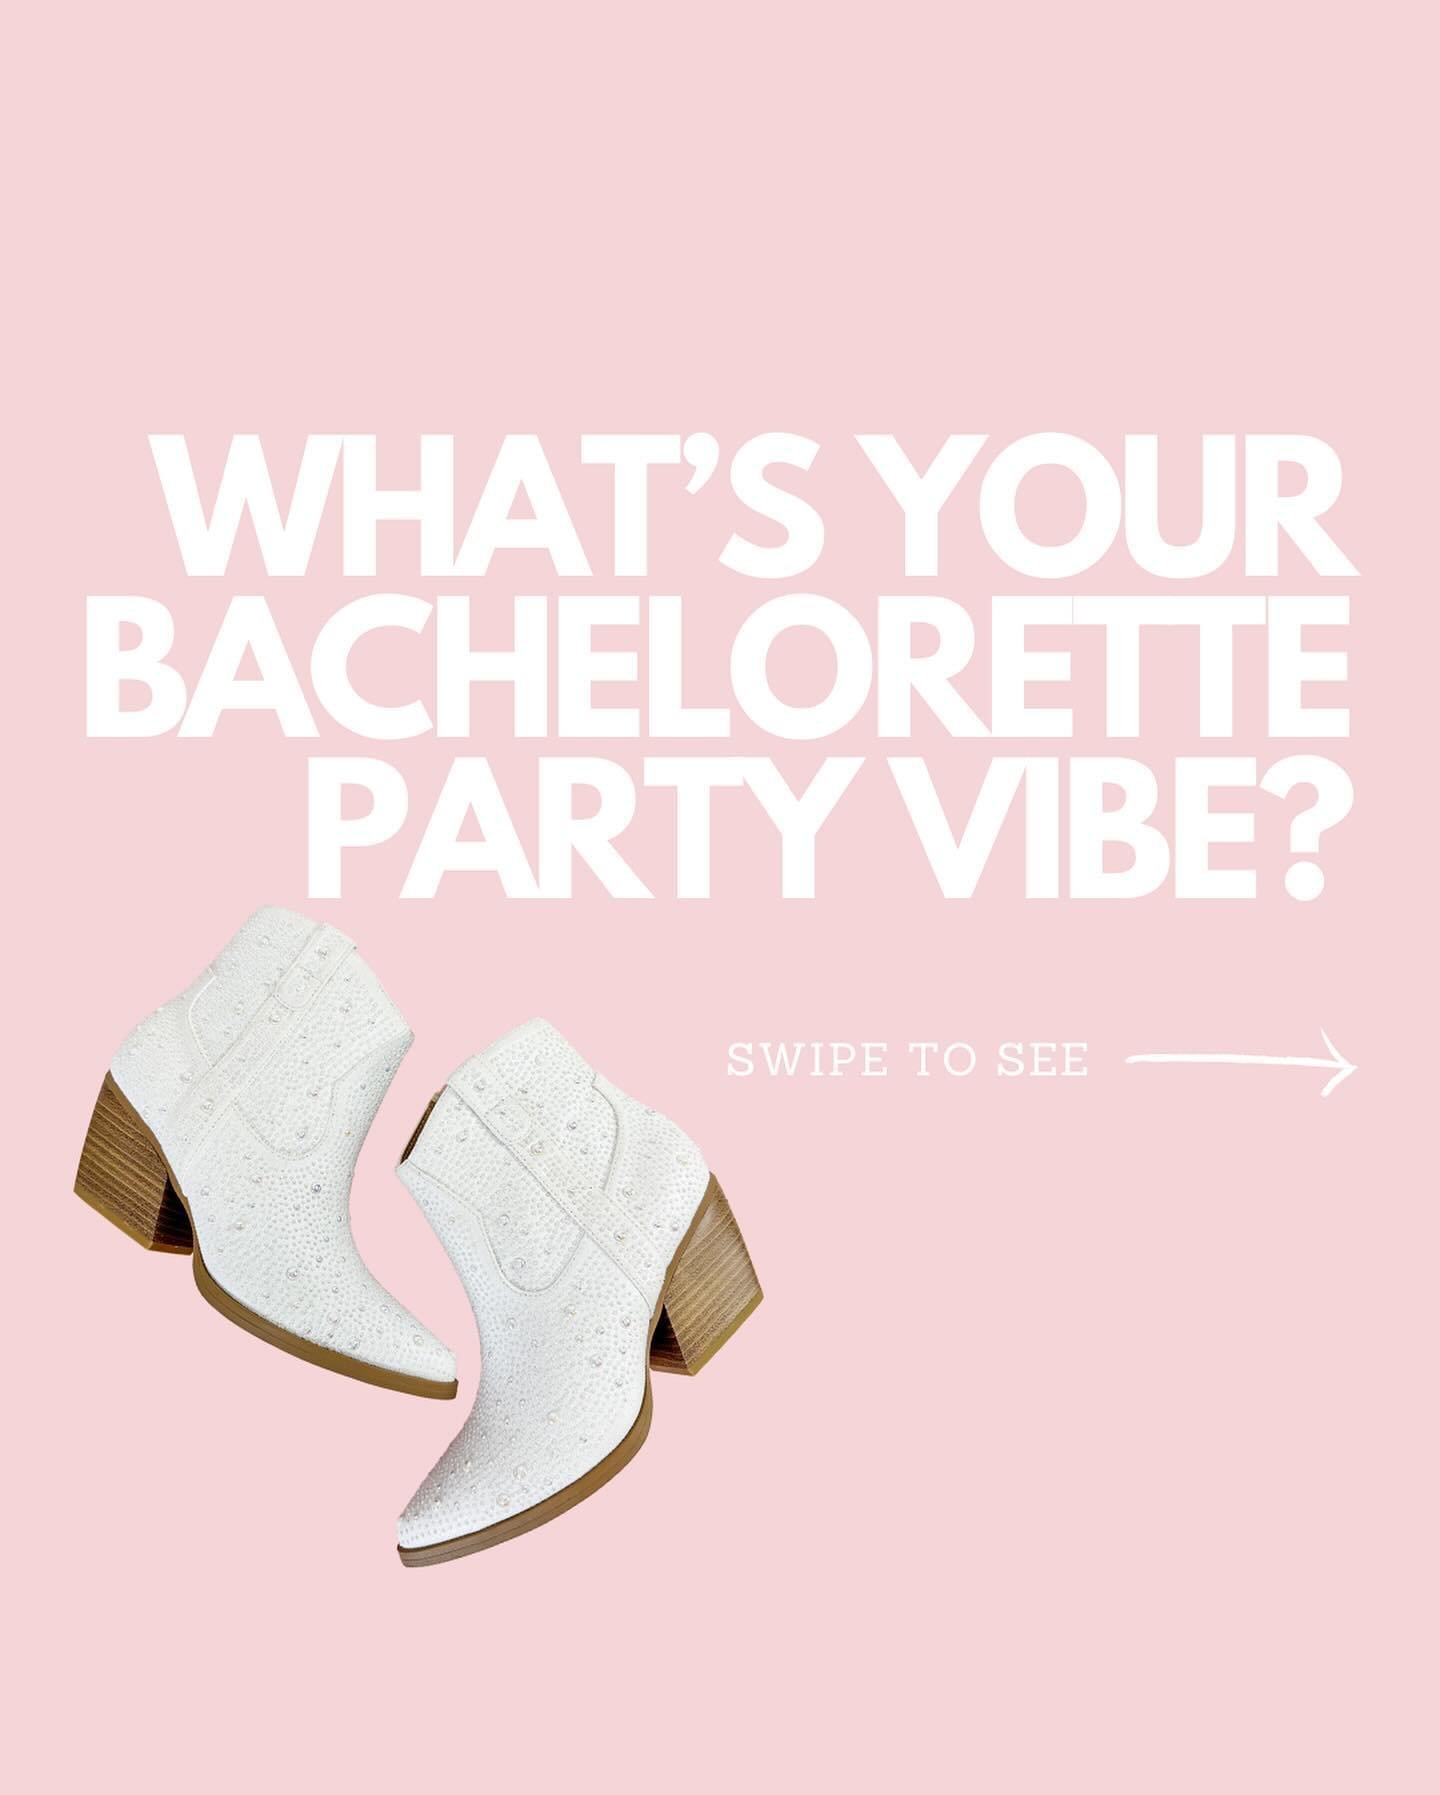 Calling all Bachelorettes! 💍 Strut into Bachelorette Party Season with the perfect pair of shoes to match your vibe 👠 Which style and destination fits you? #bachelorettepartyshoes